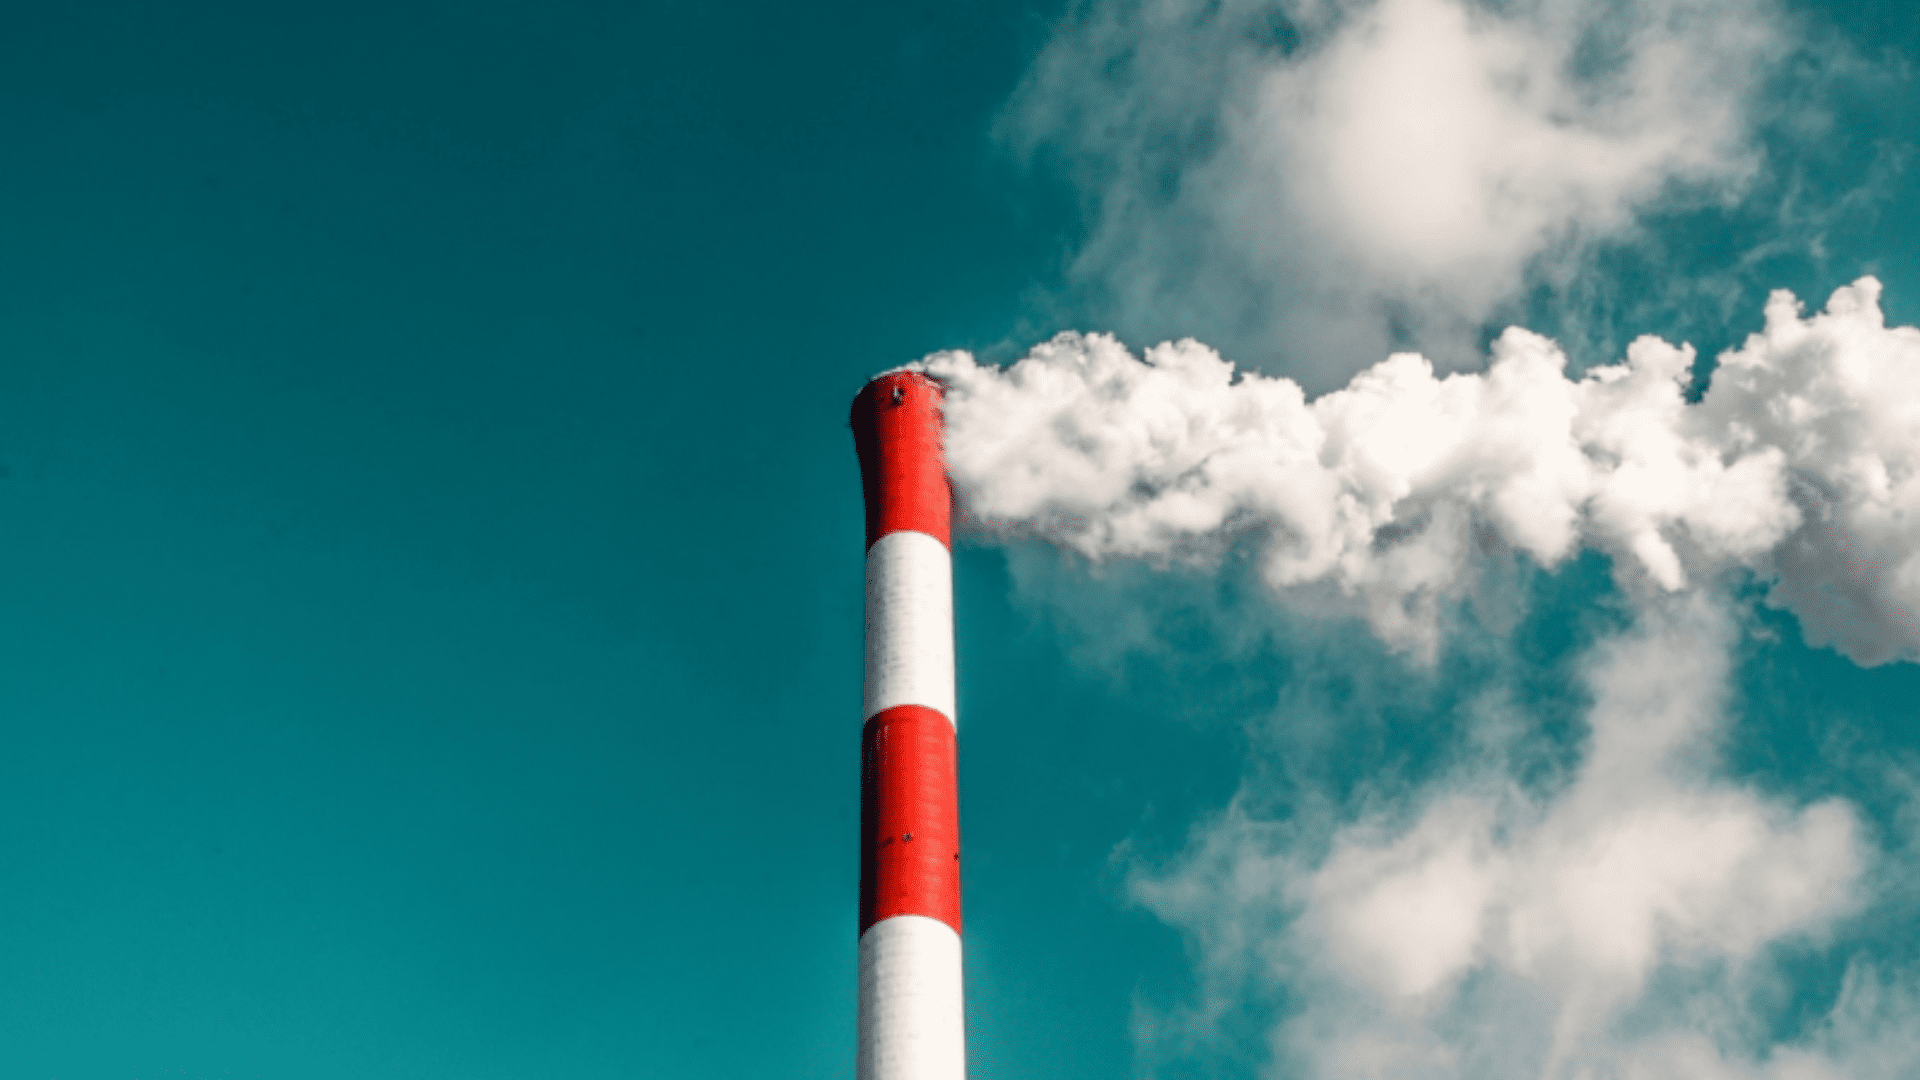 Taking action on emissions